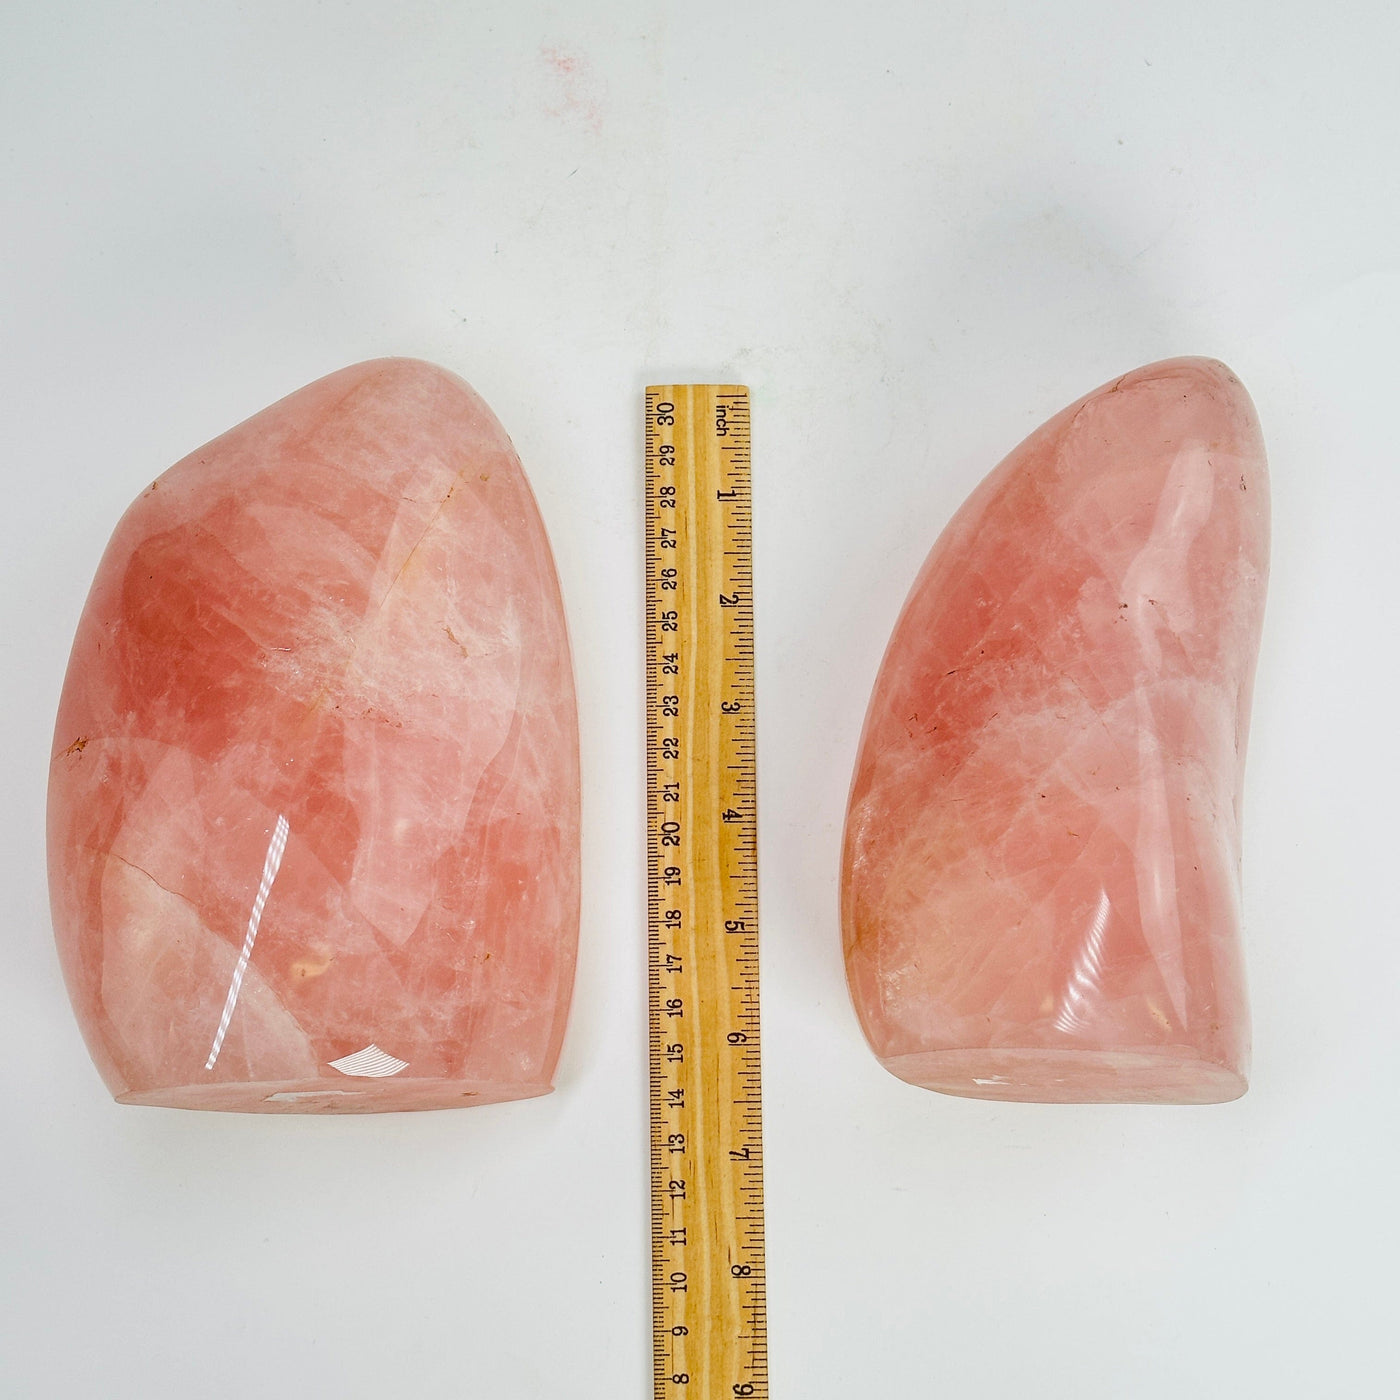 rose quartz polished cutbases next to a ruler for size reference